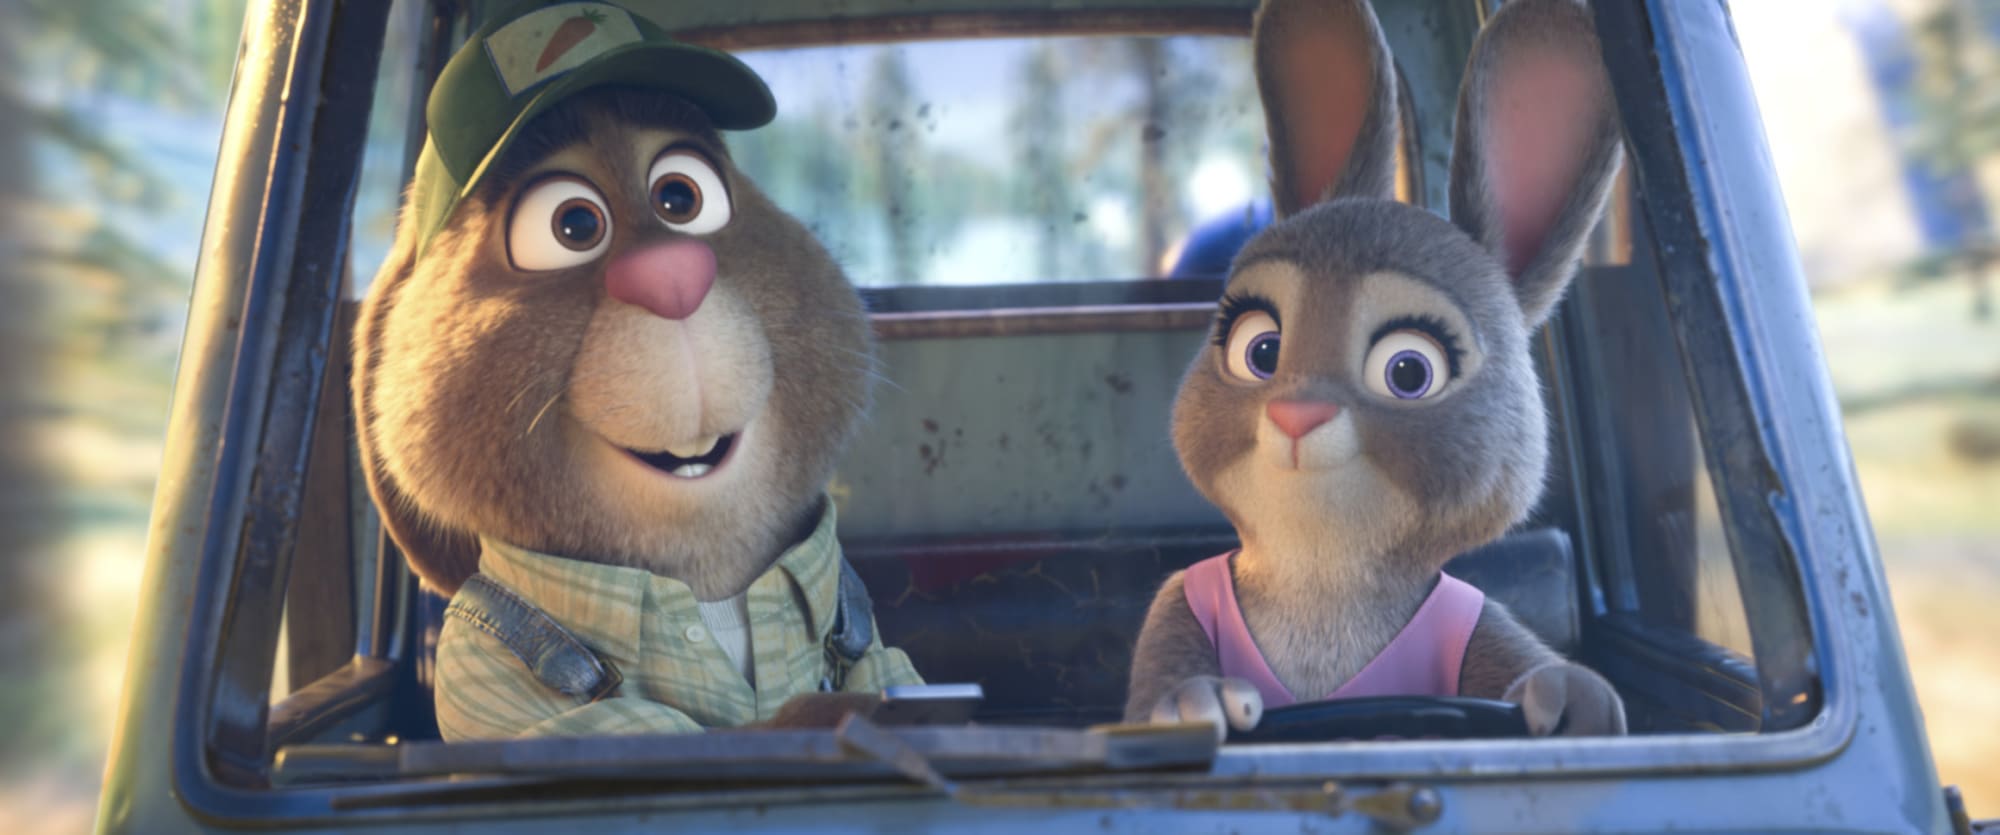 Zootopia+' Revisits a Smiling Sloth, Con-Artist Weasel, and Other Colorful  Characters | Animation World Network